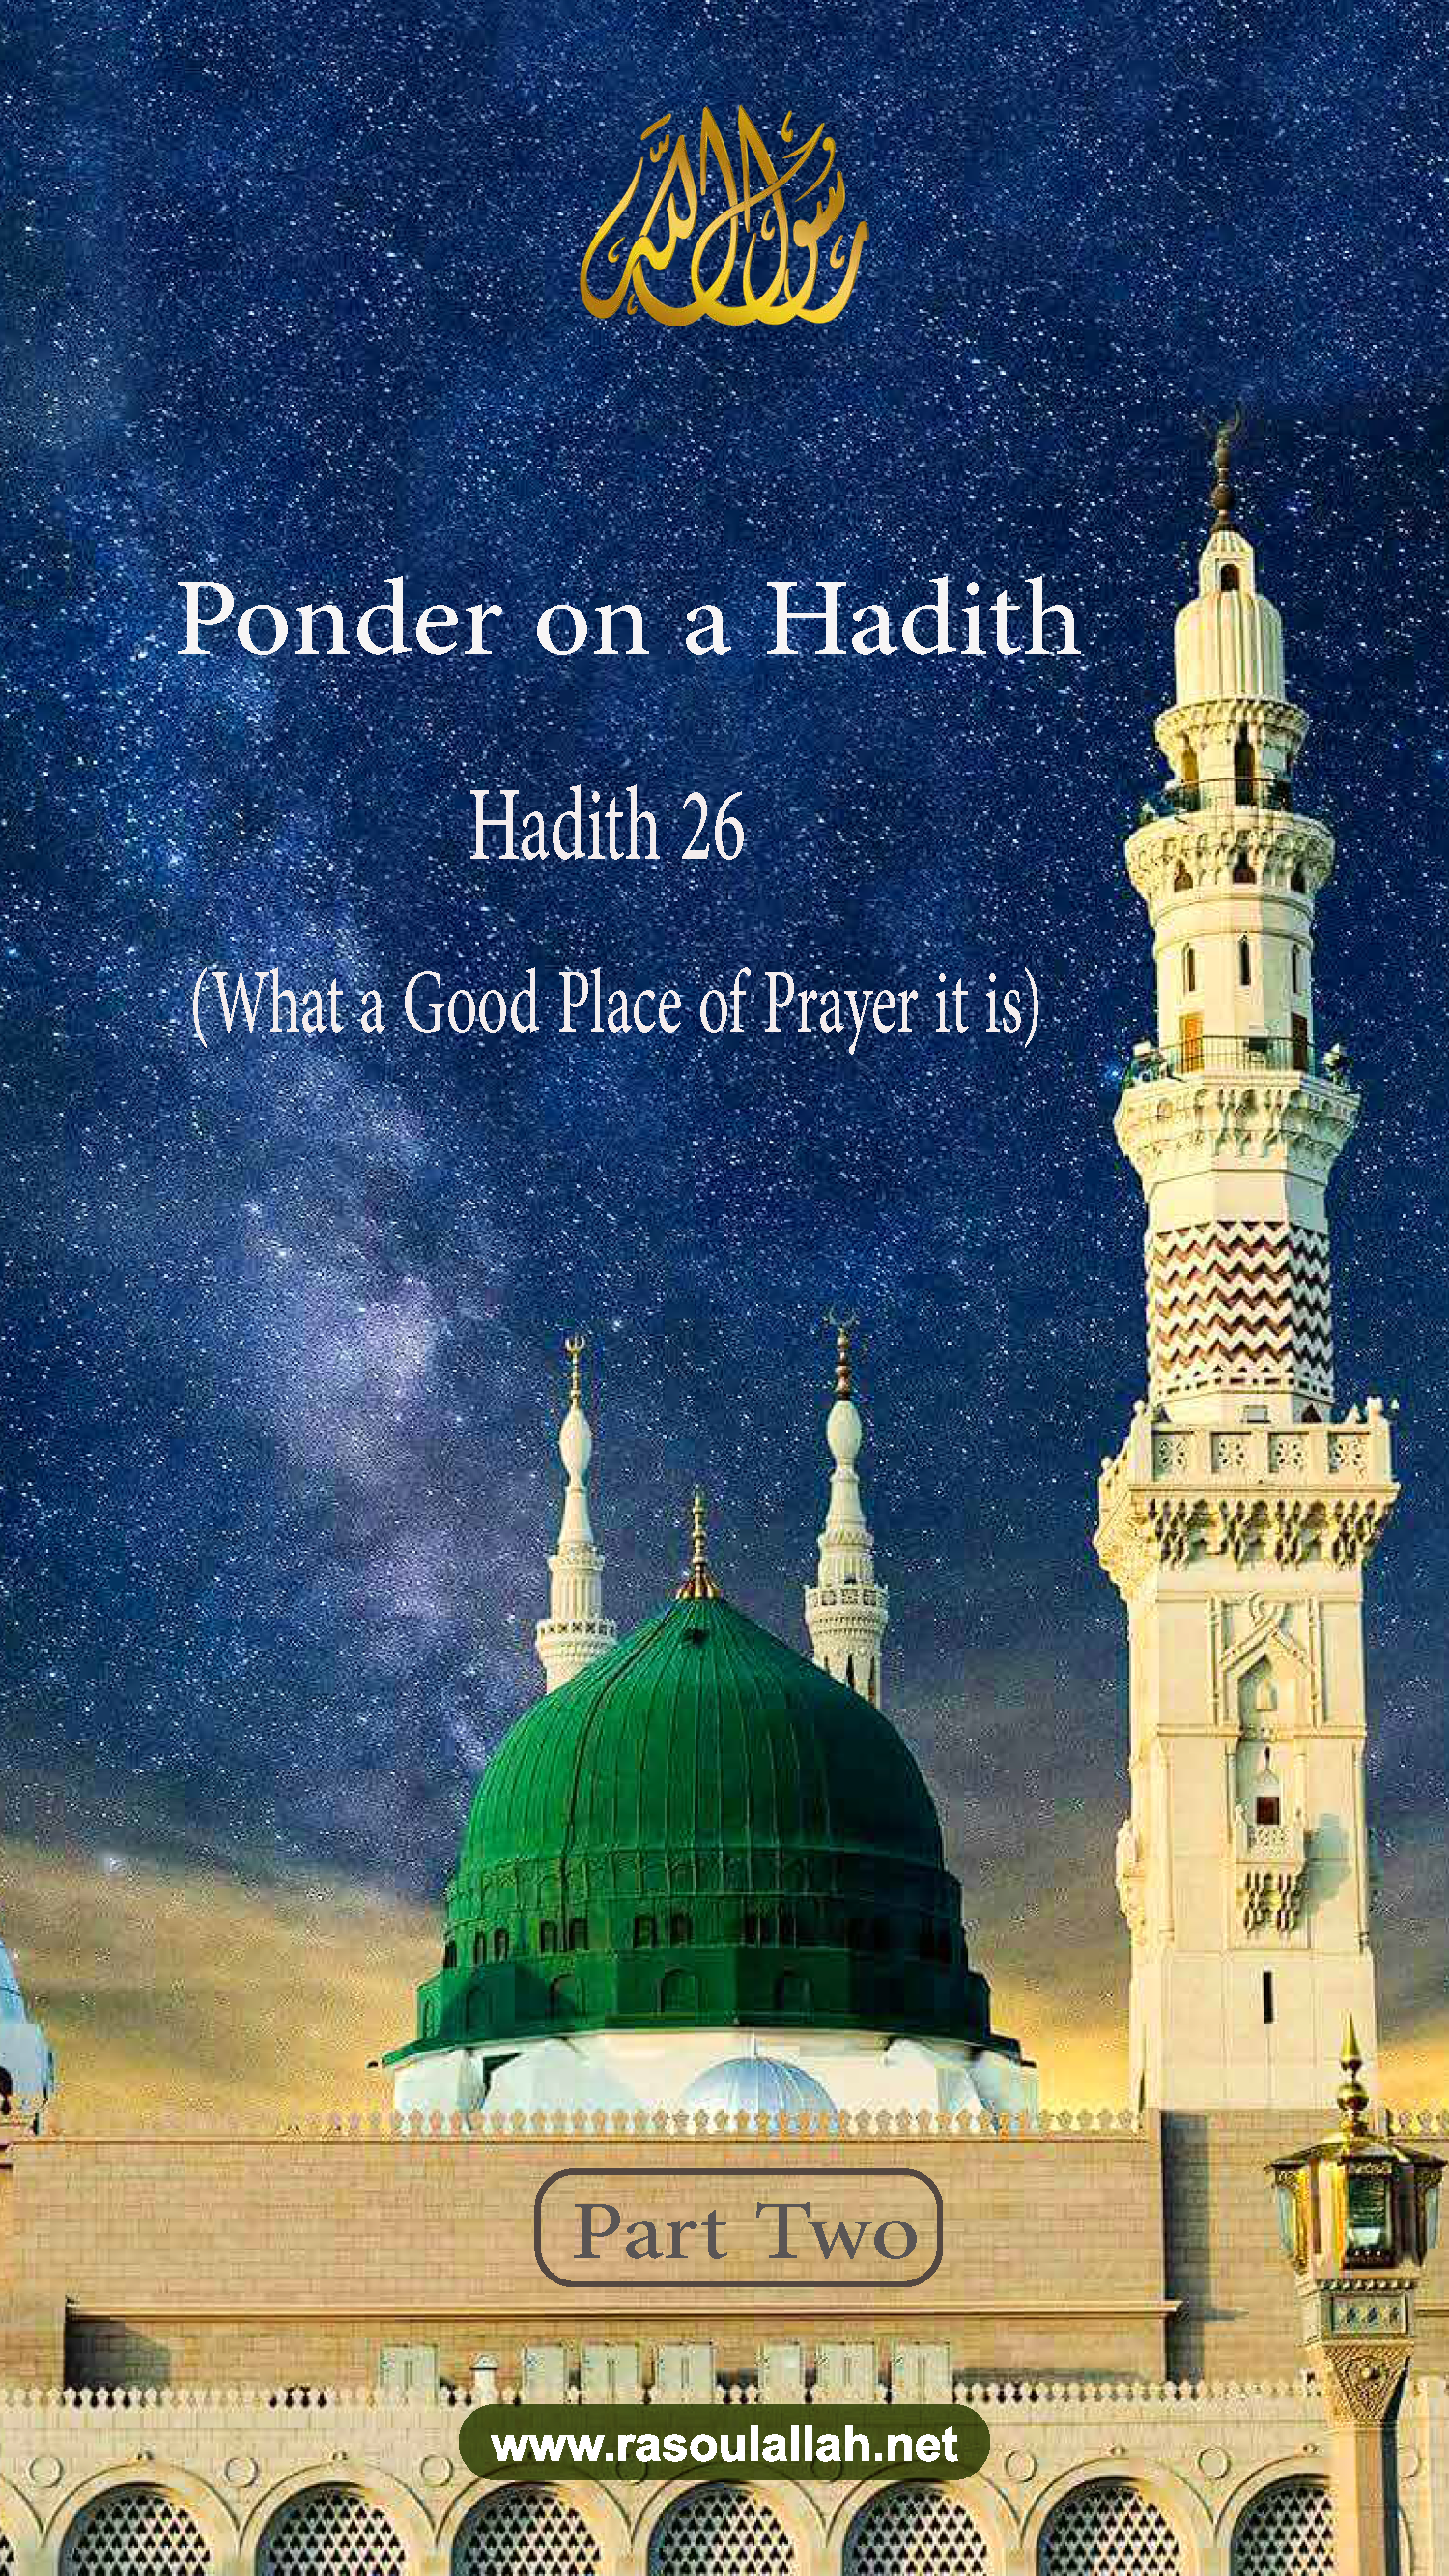 Hadith‌ ‌26:‌ ‌(What‌ ‌a‌ ‌Good‌ ‌Place‌ ‌of‌ ‌Prayer‌ ‌it‌ ‌is)‌ ‌